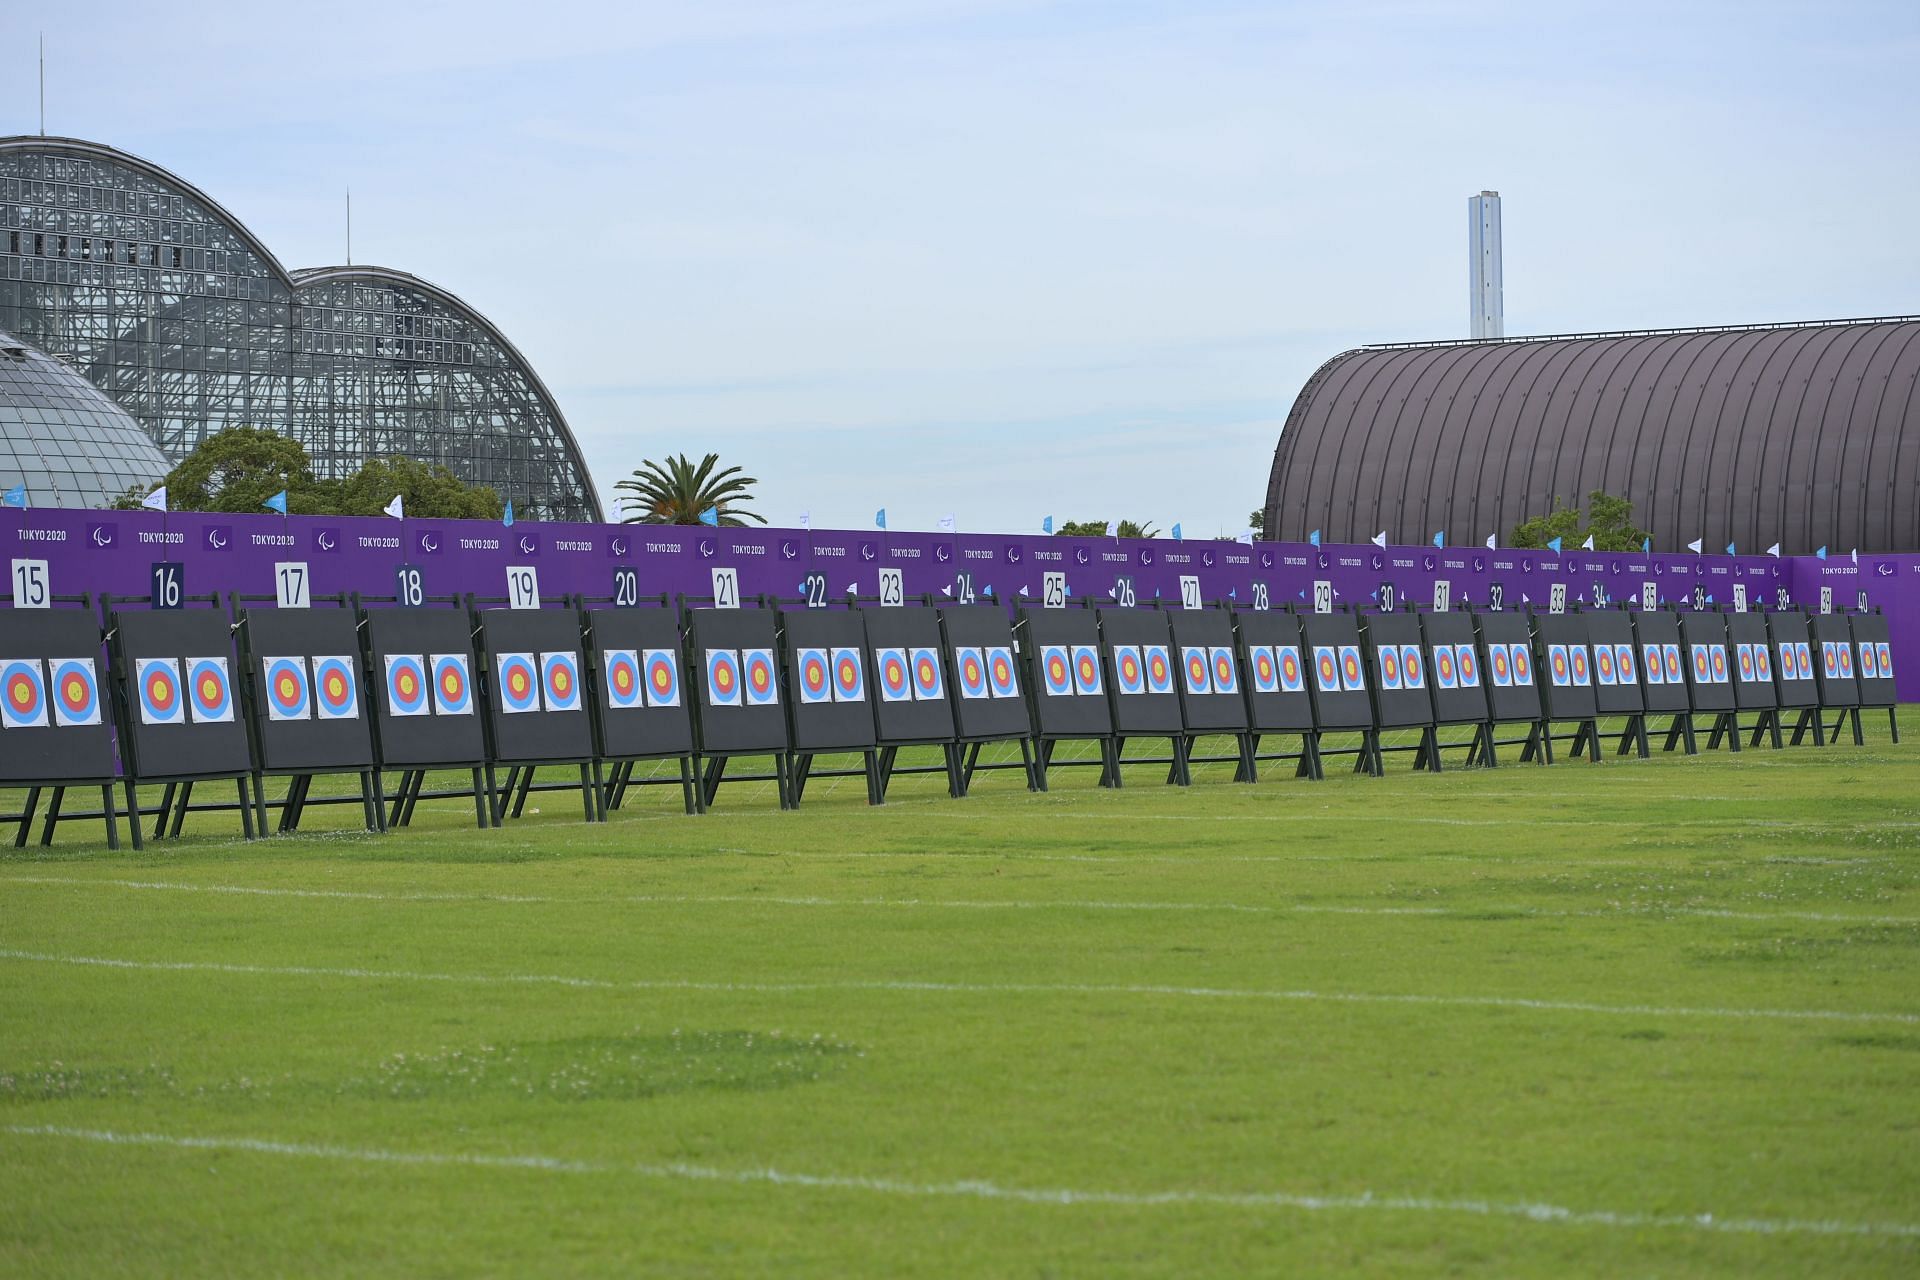 The archery ground at the 2021 Tokyo Paralympics (Image courtesy: Getty Images)